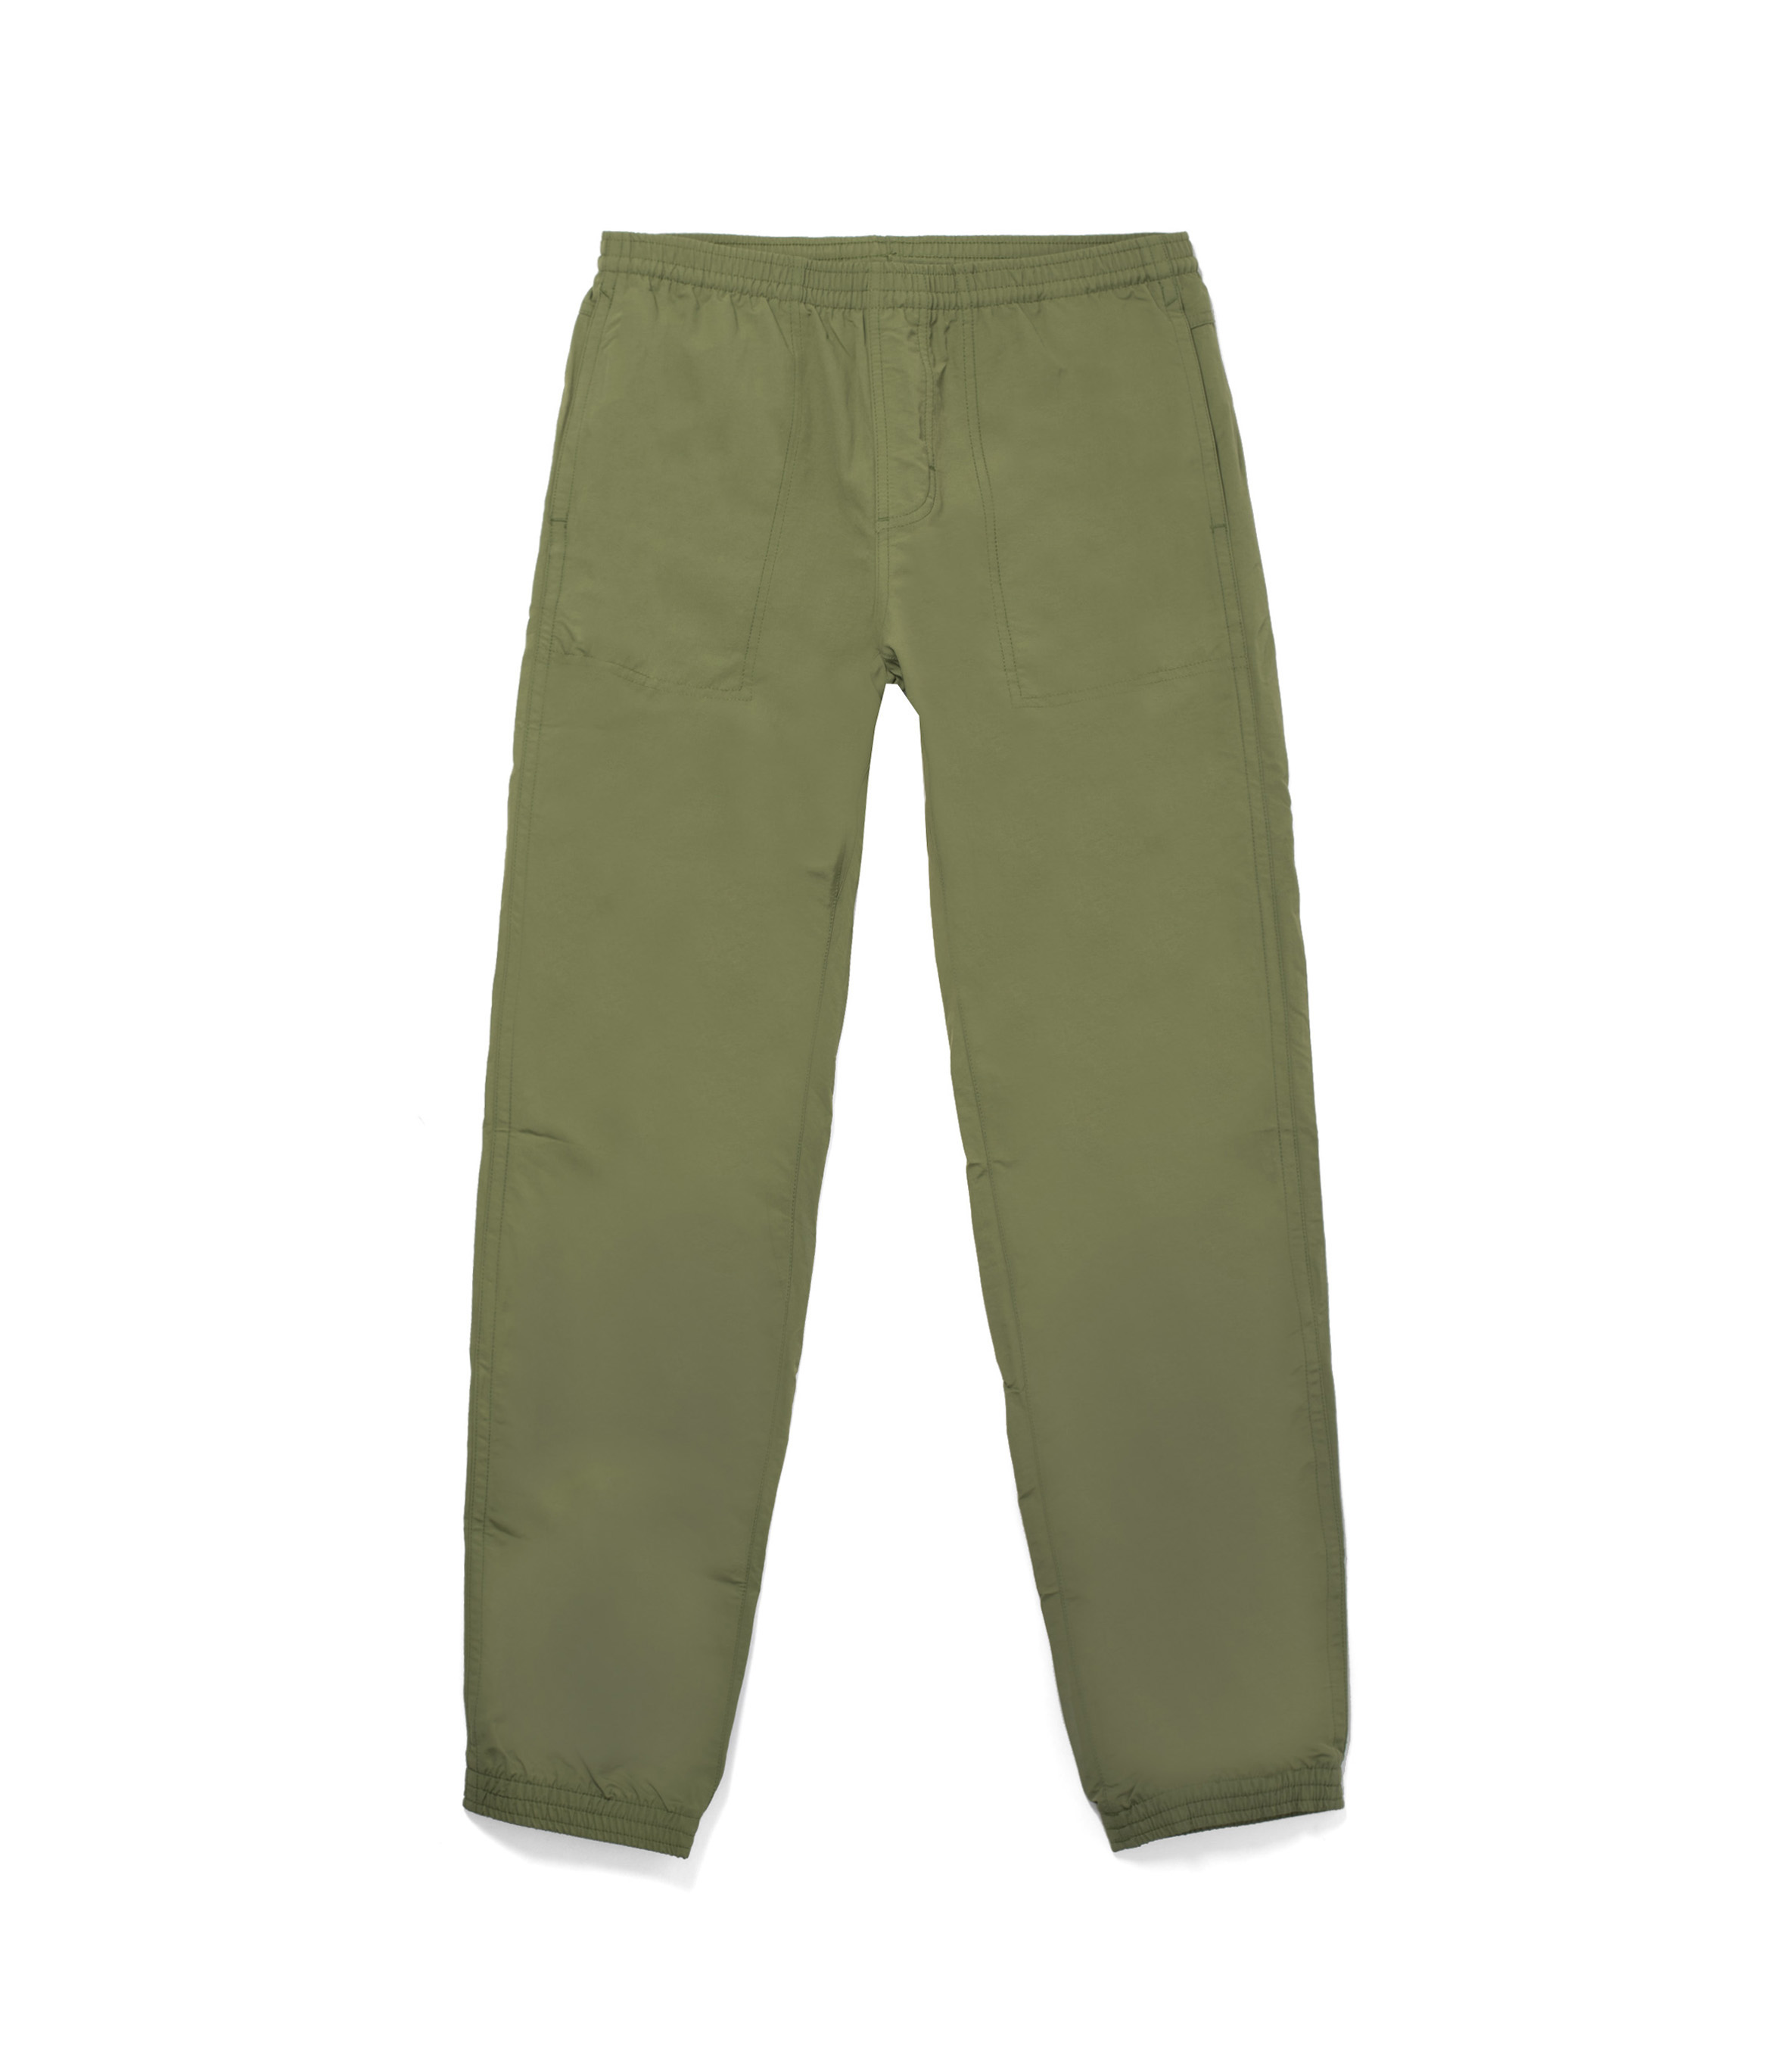 Patagonia Baggies Pants - Sprouted Green